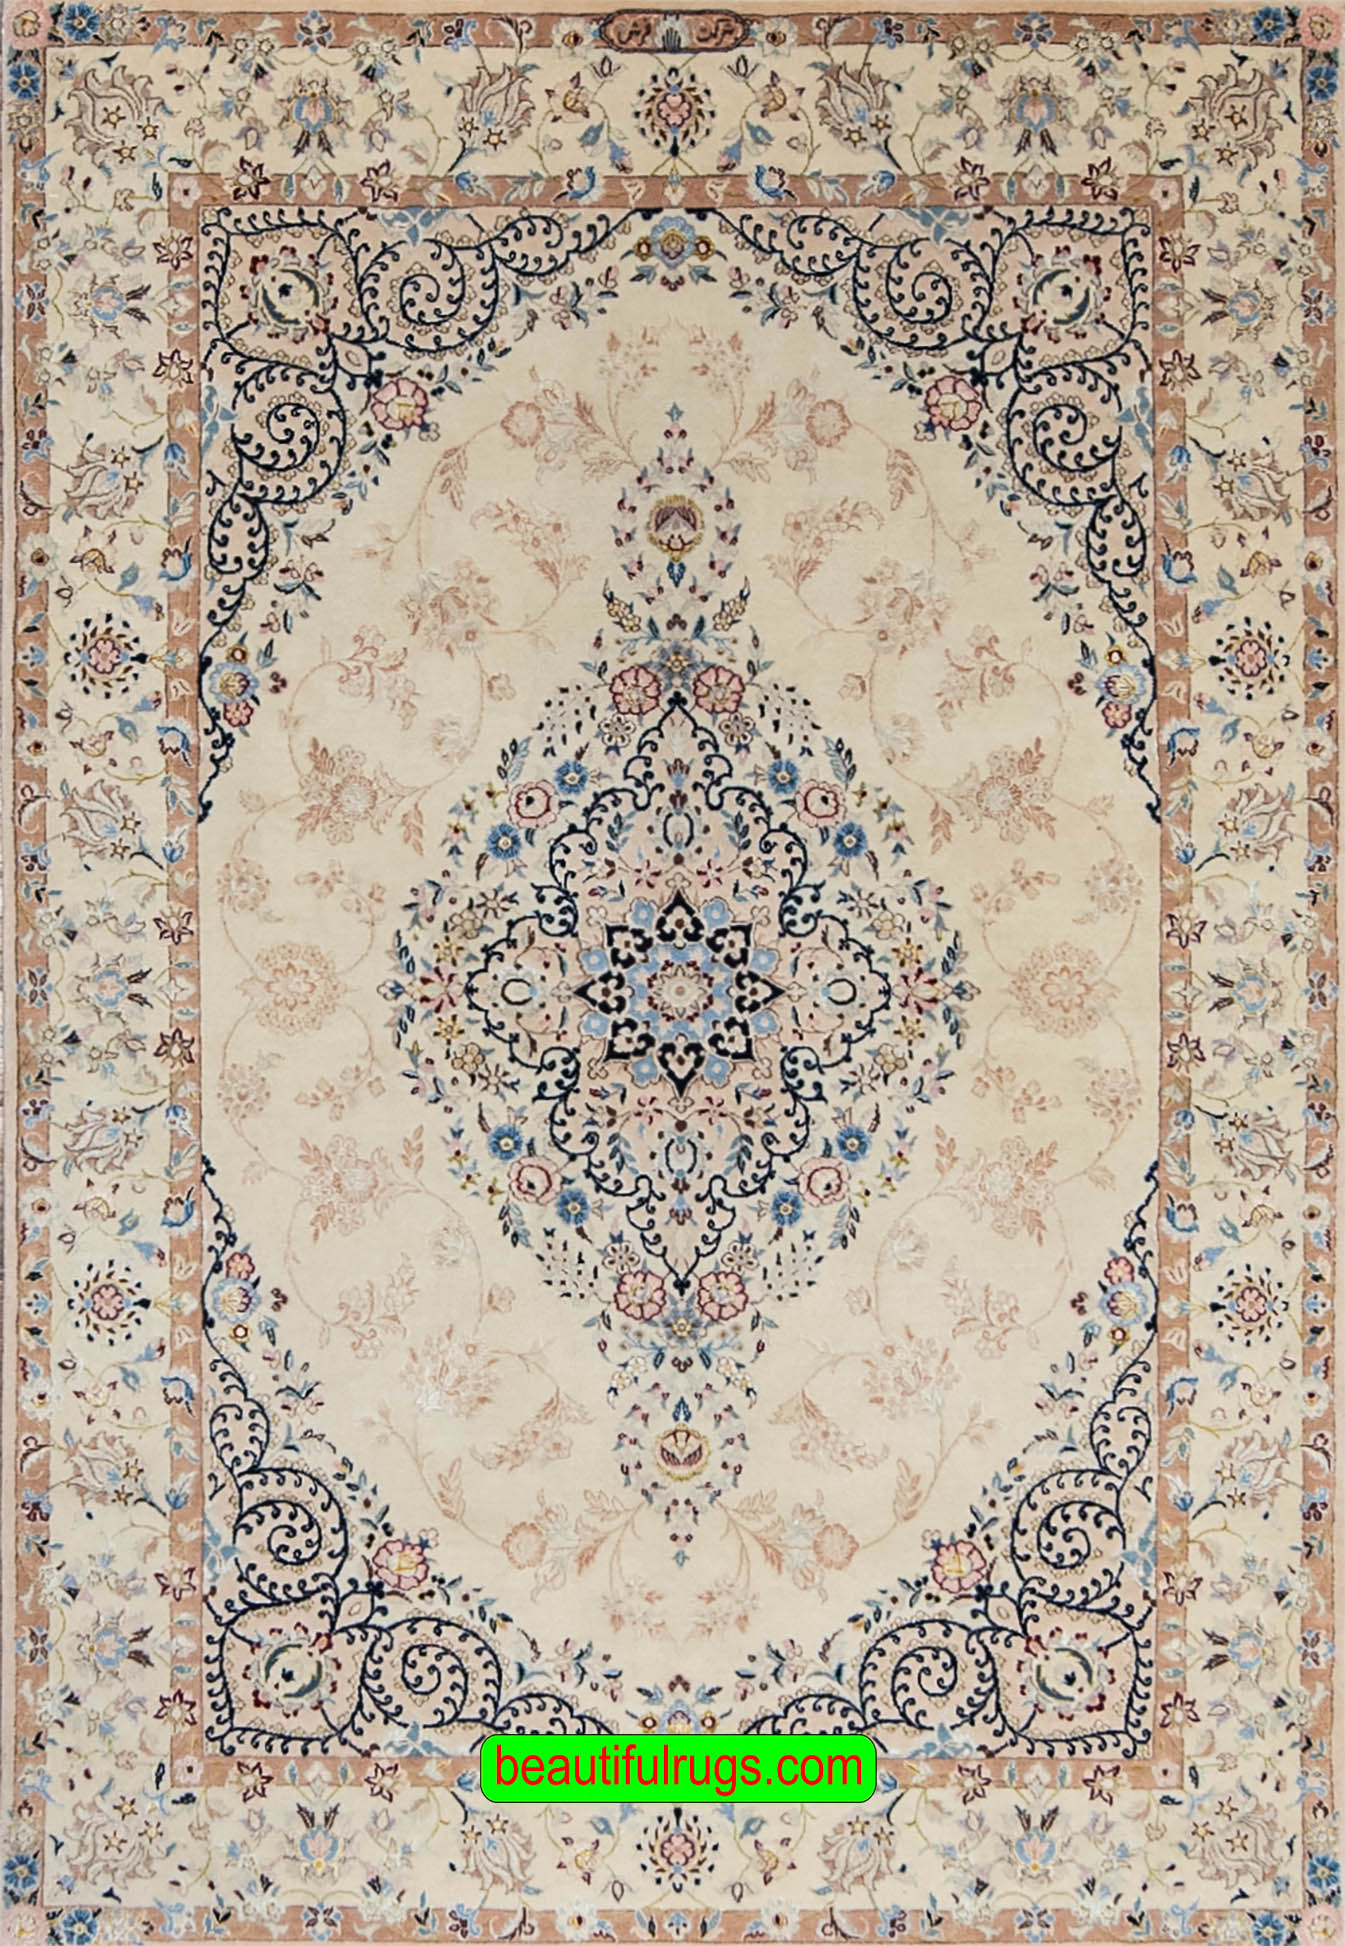 Handmade Persian Nain beige rug, wool, and silk Persian rug with medallion. Size 4.4x6.5.